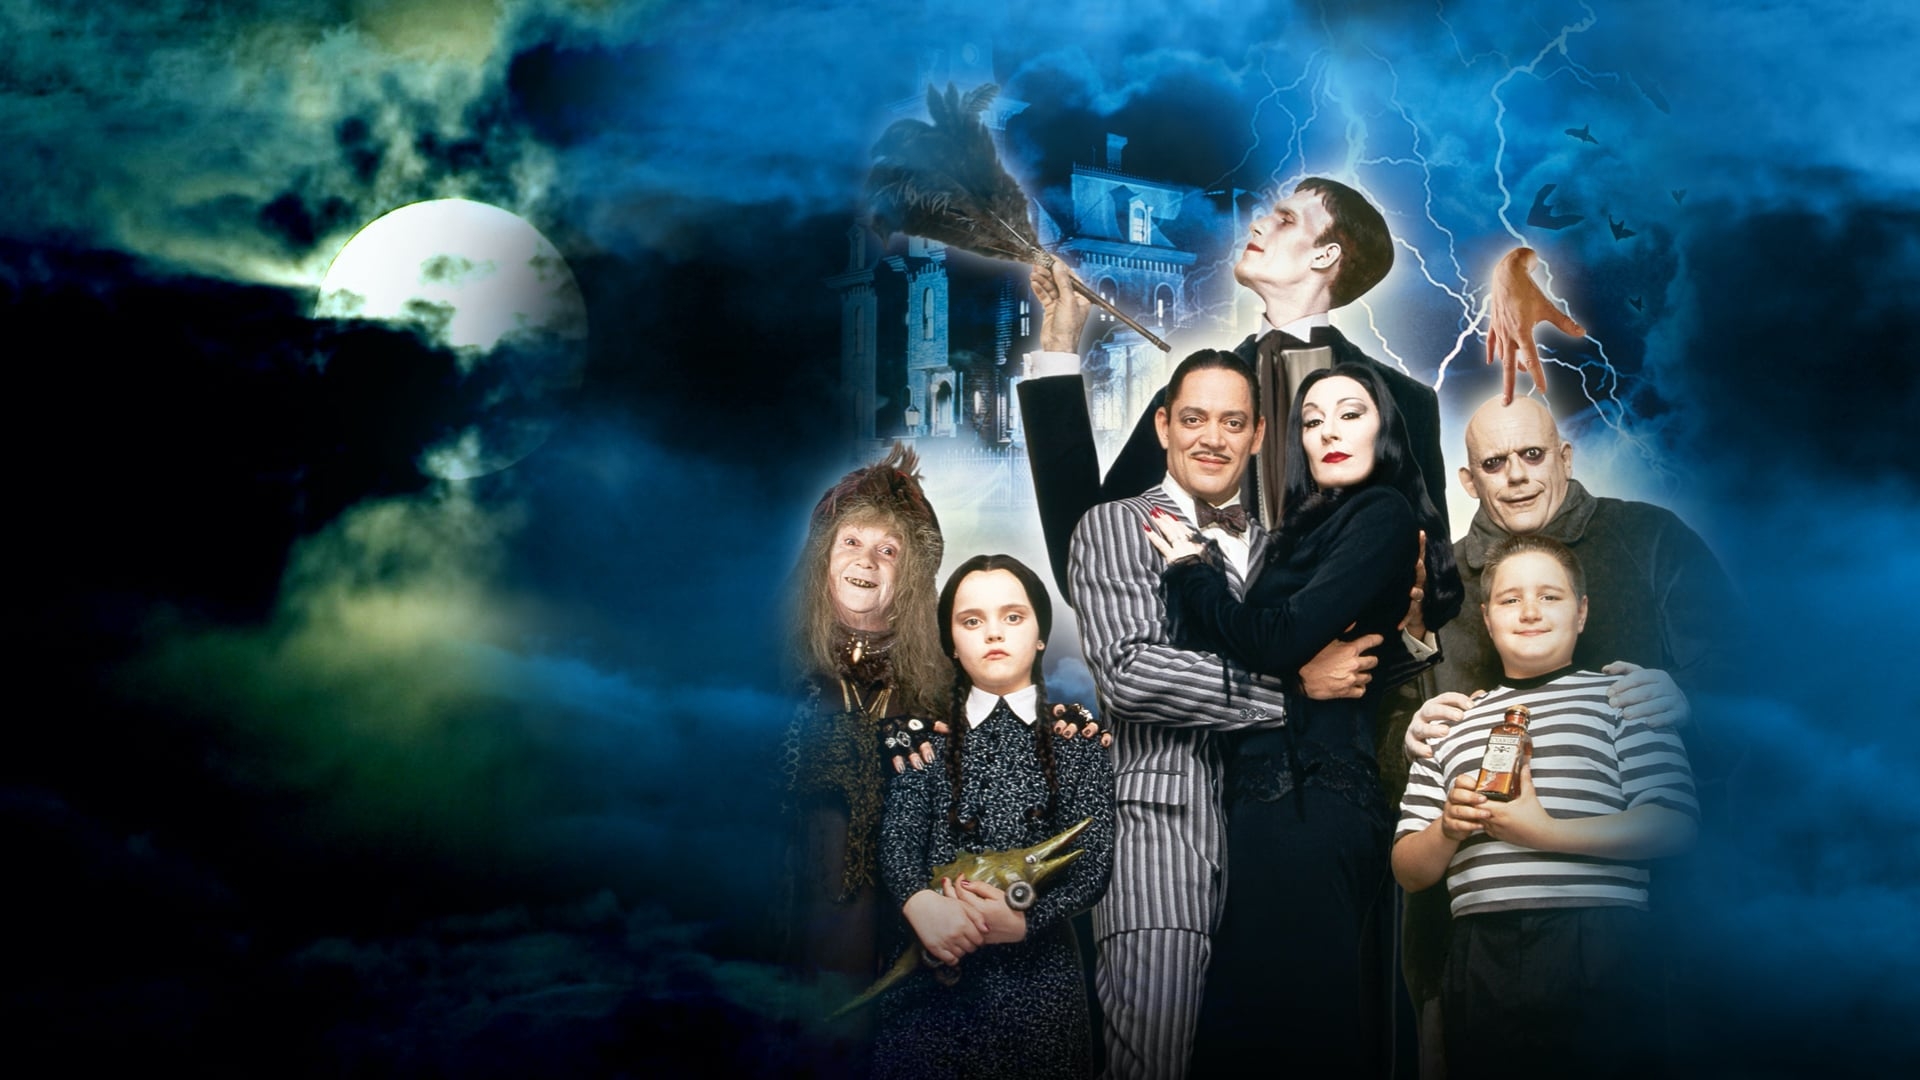 The Addams Family (The Addams Family)